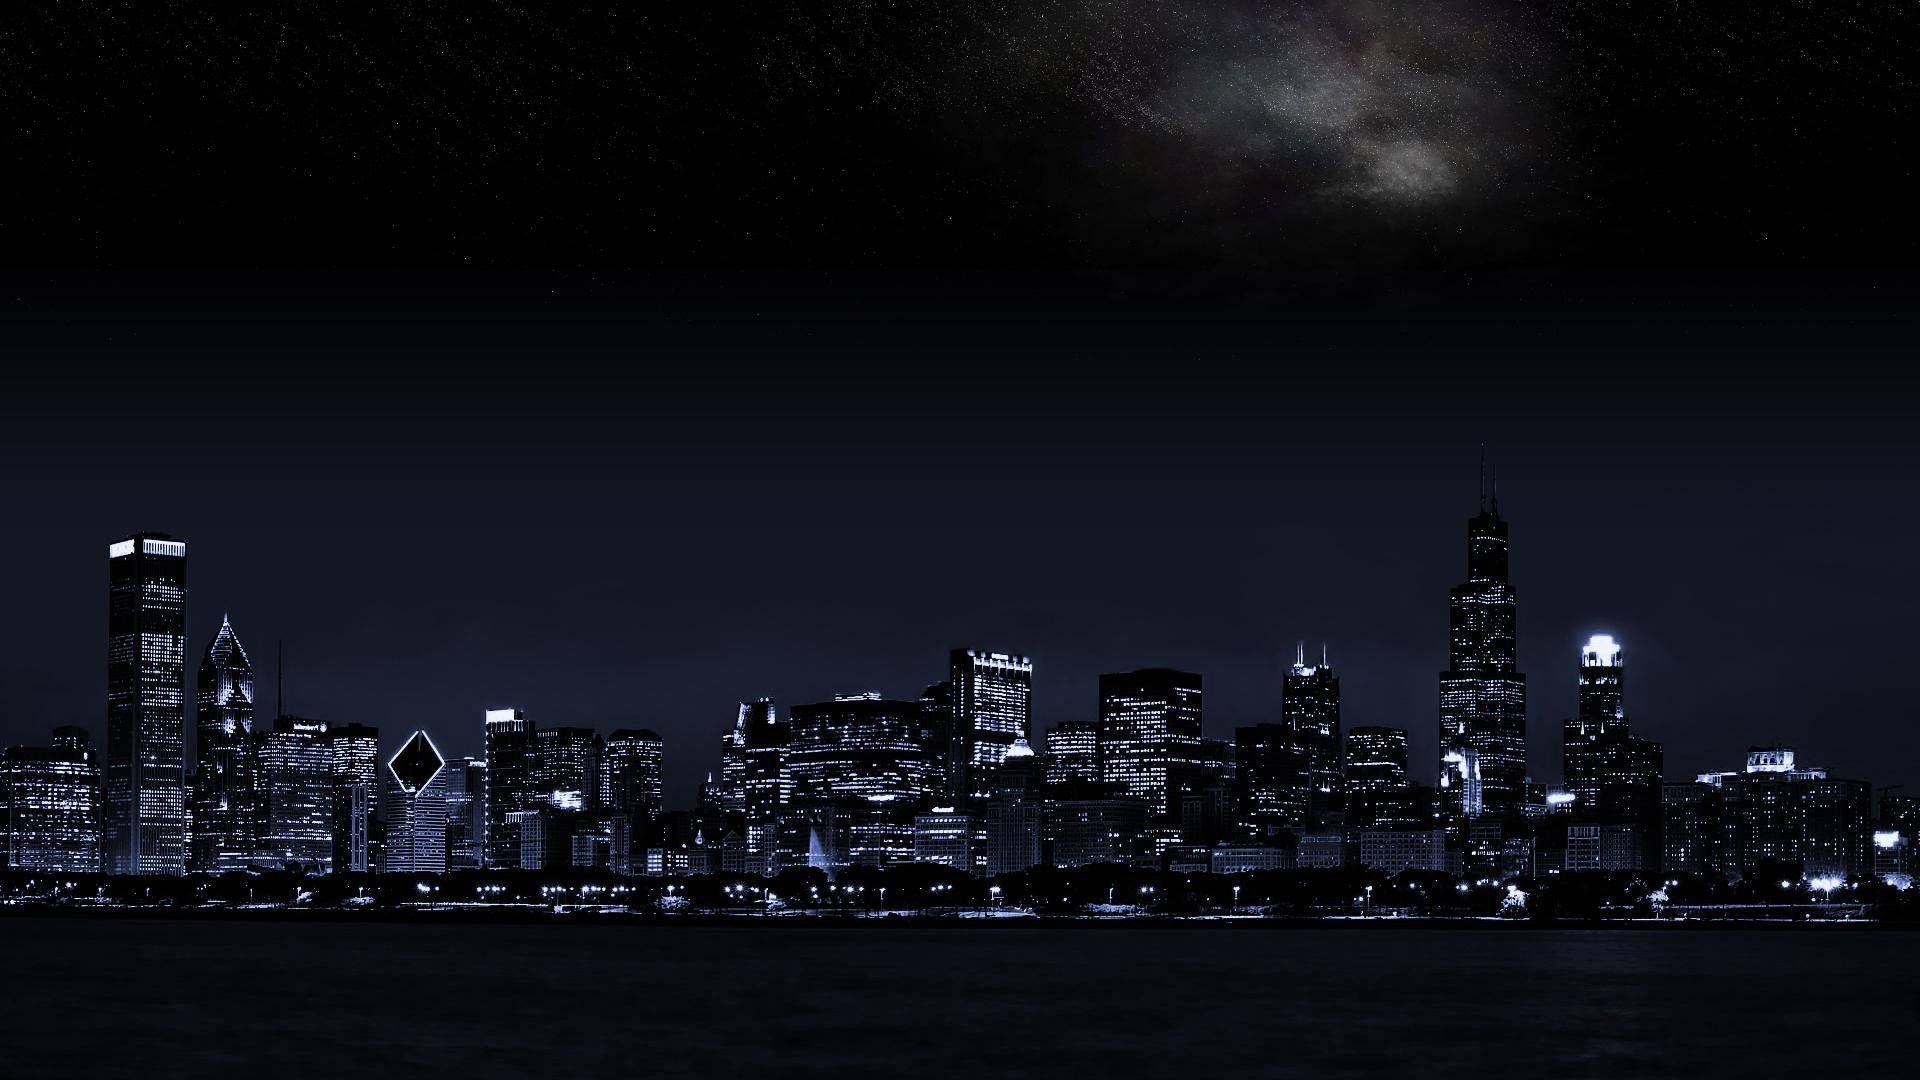 "Discover the beauty of Night City in the night sky. #NightCityAesthetic" Wallpaper